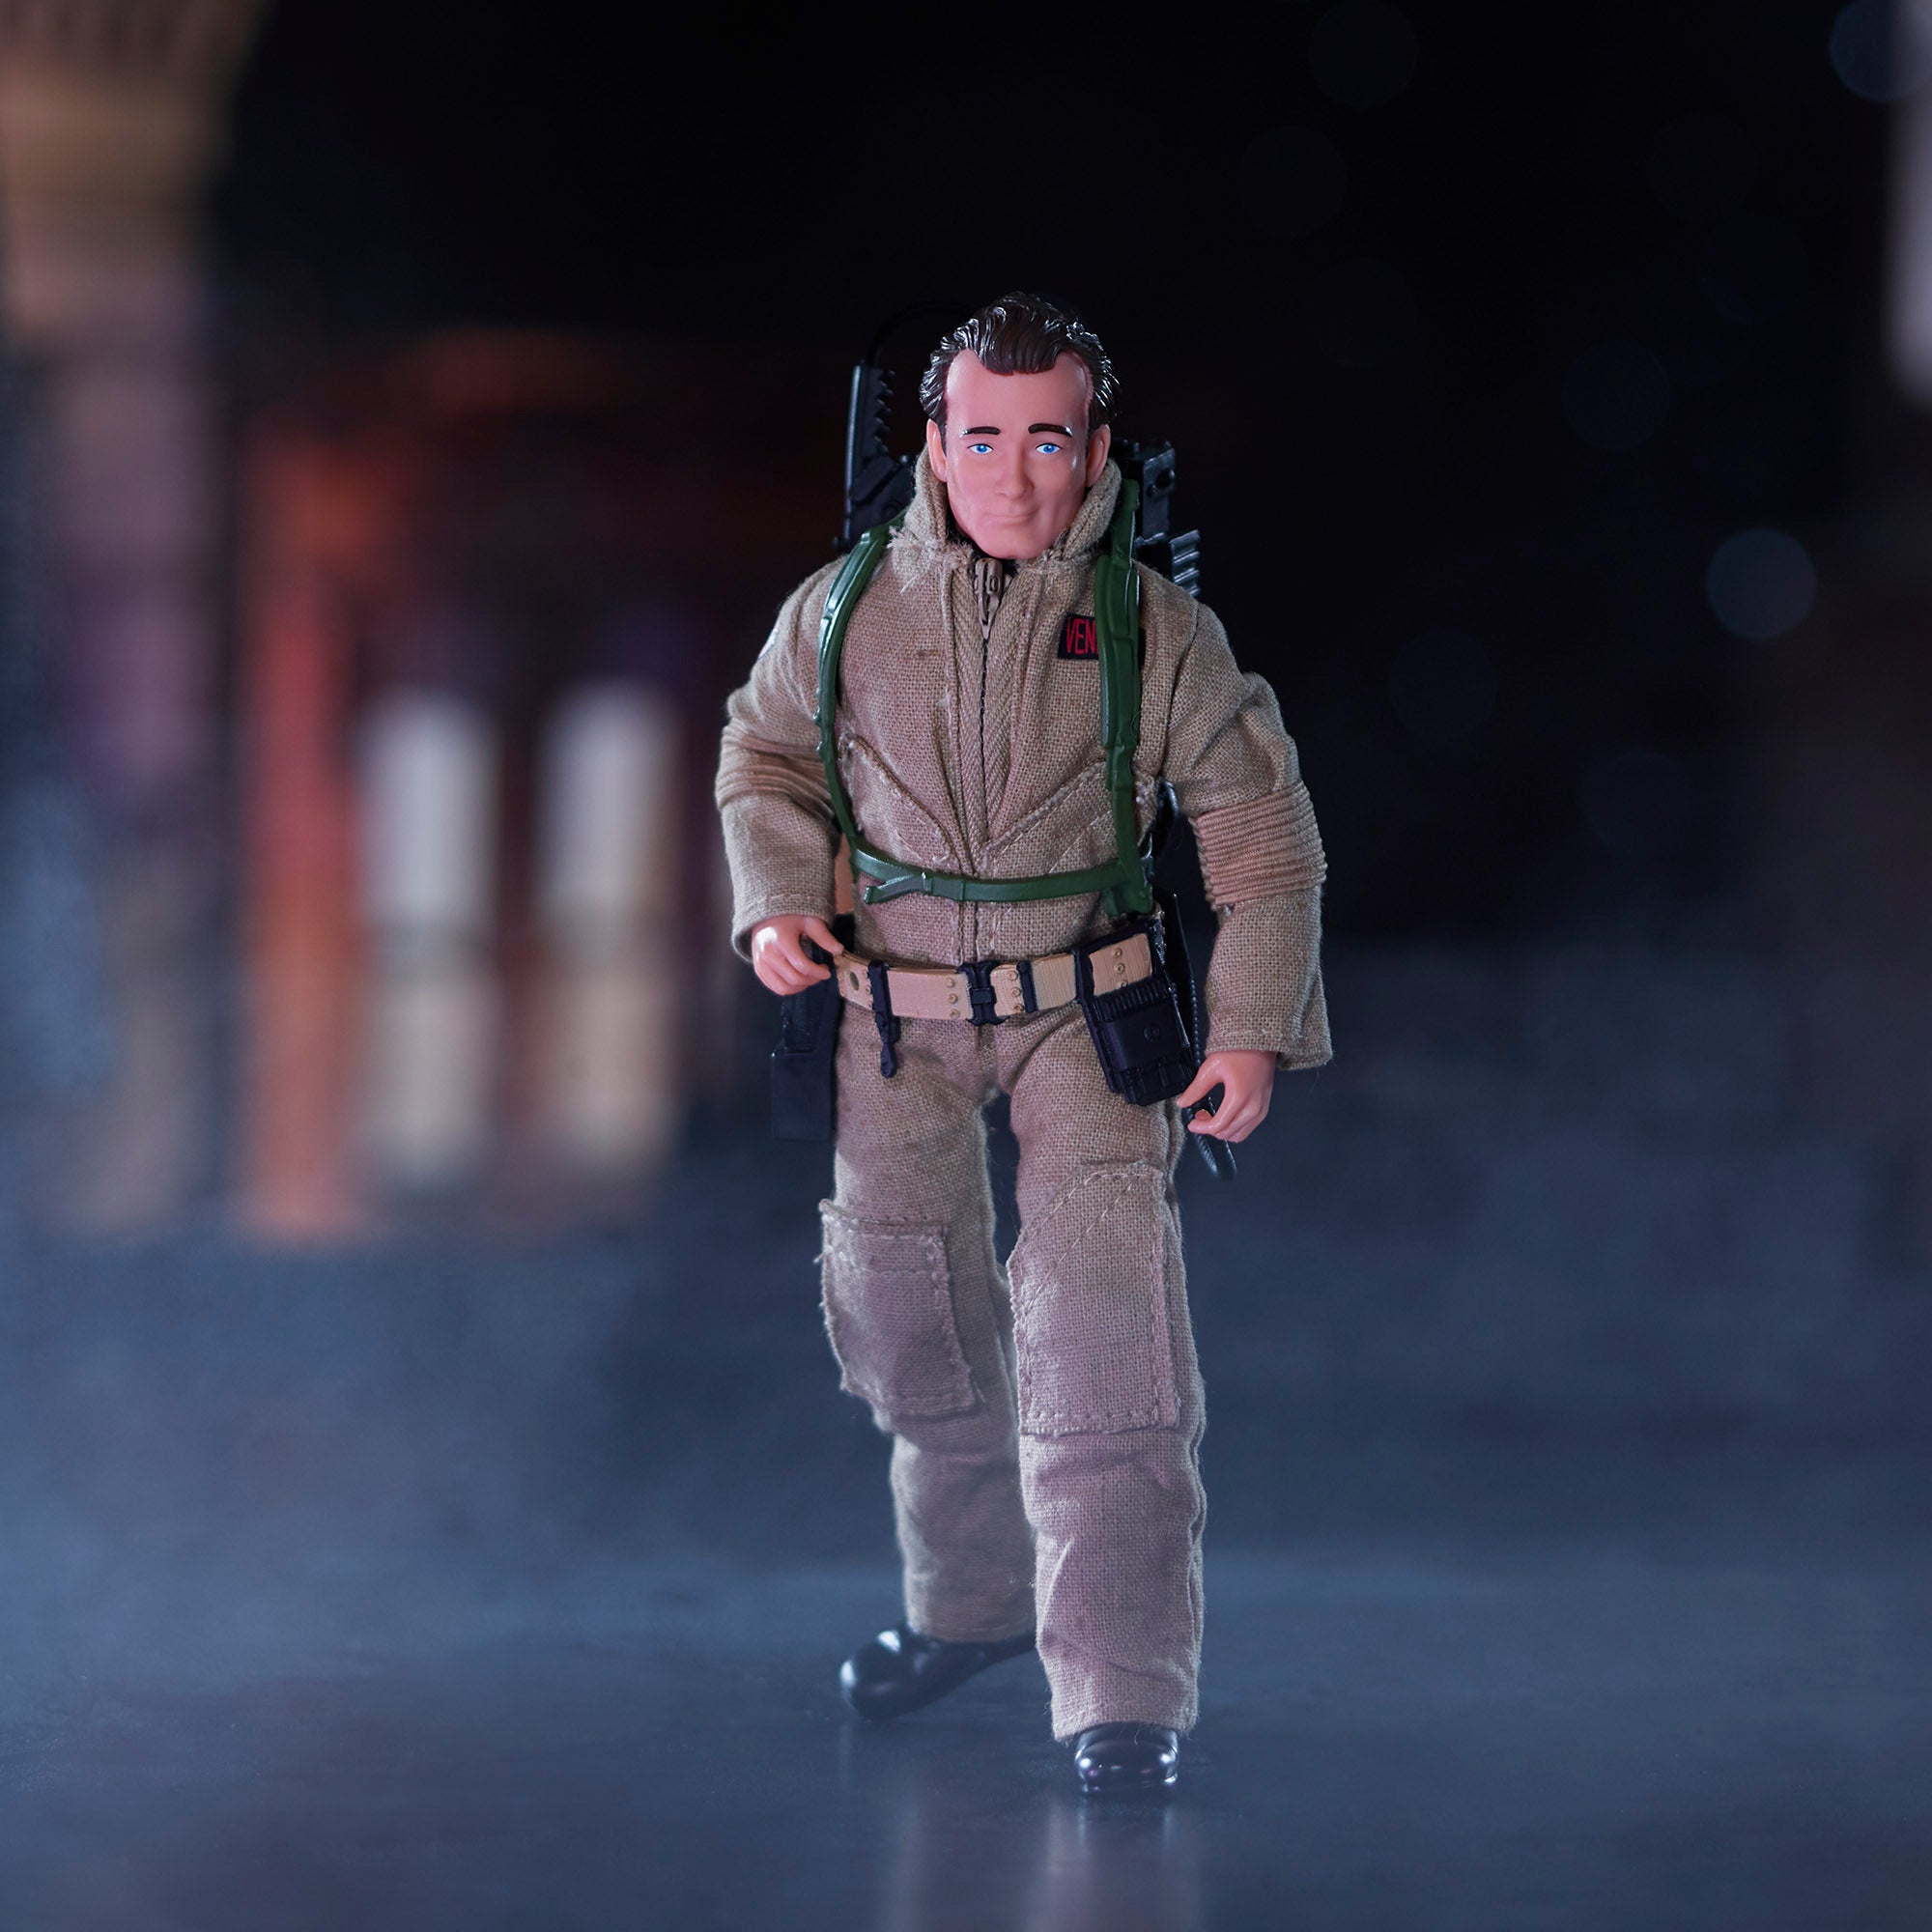 Ghostbusters x Mego 16